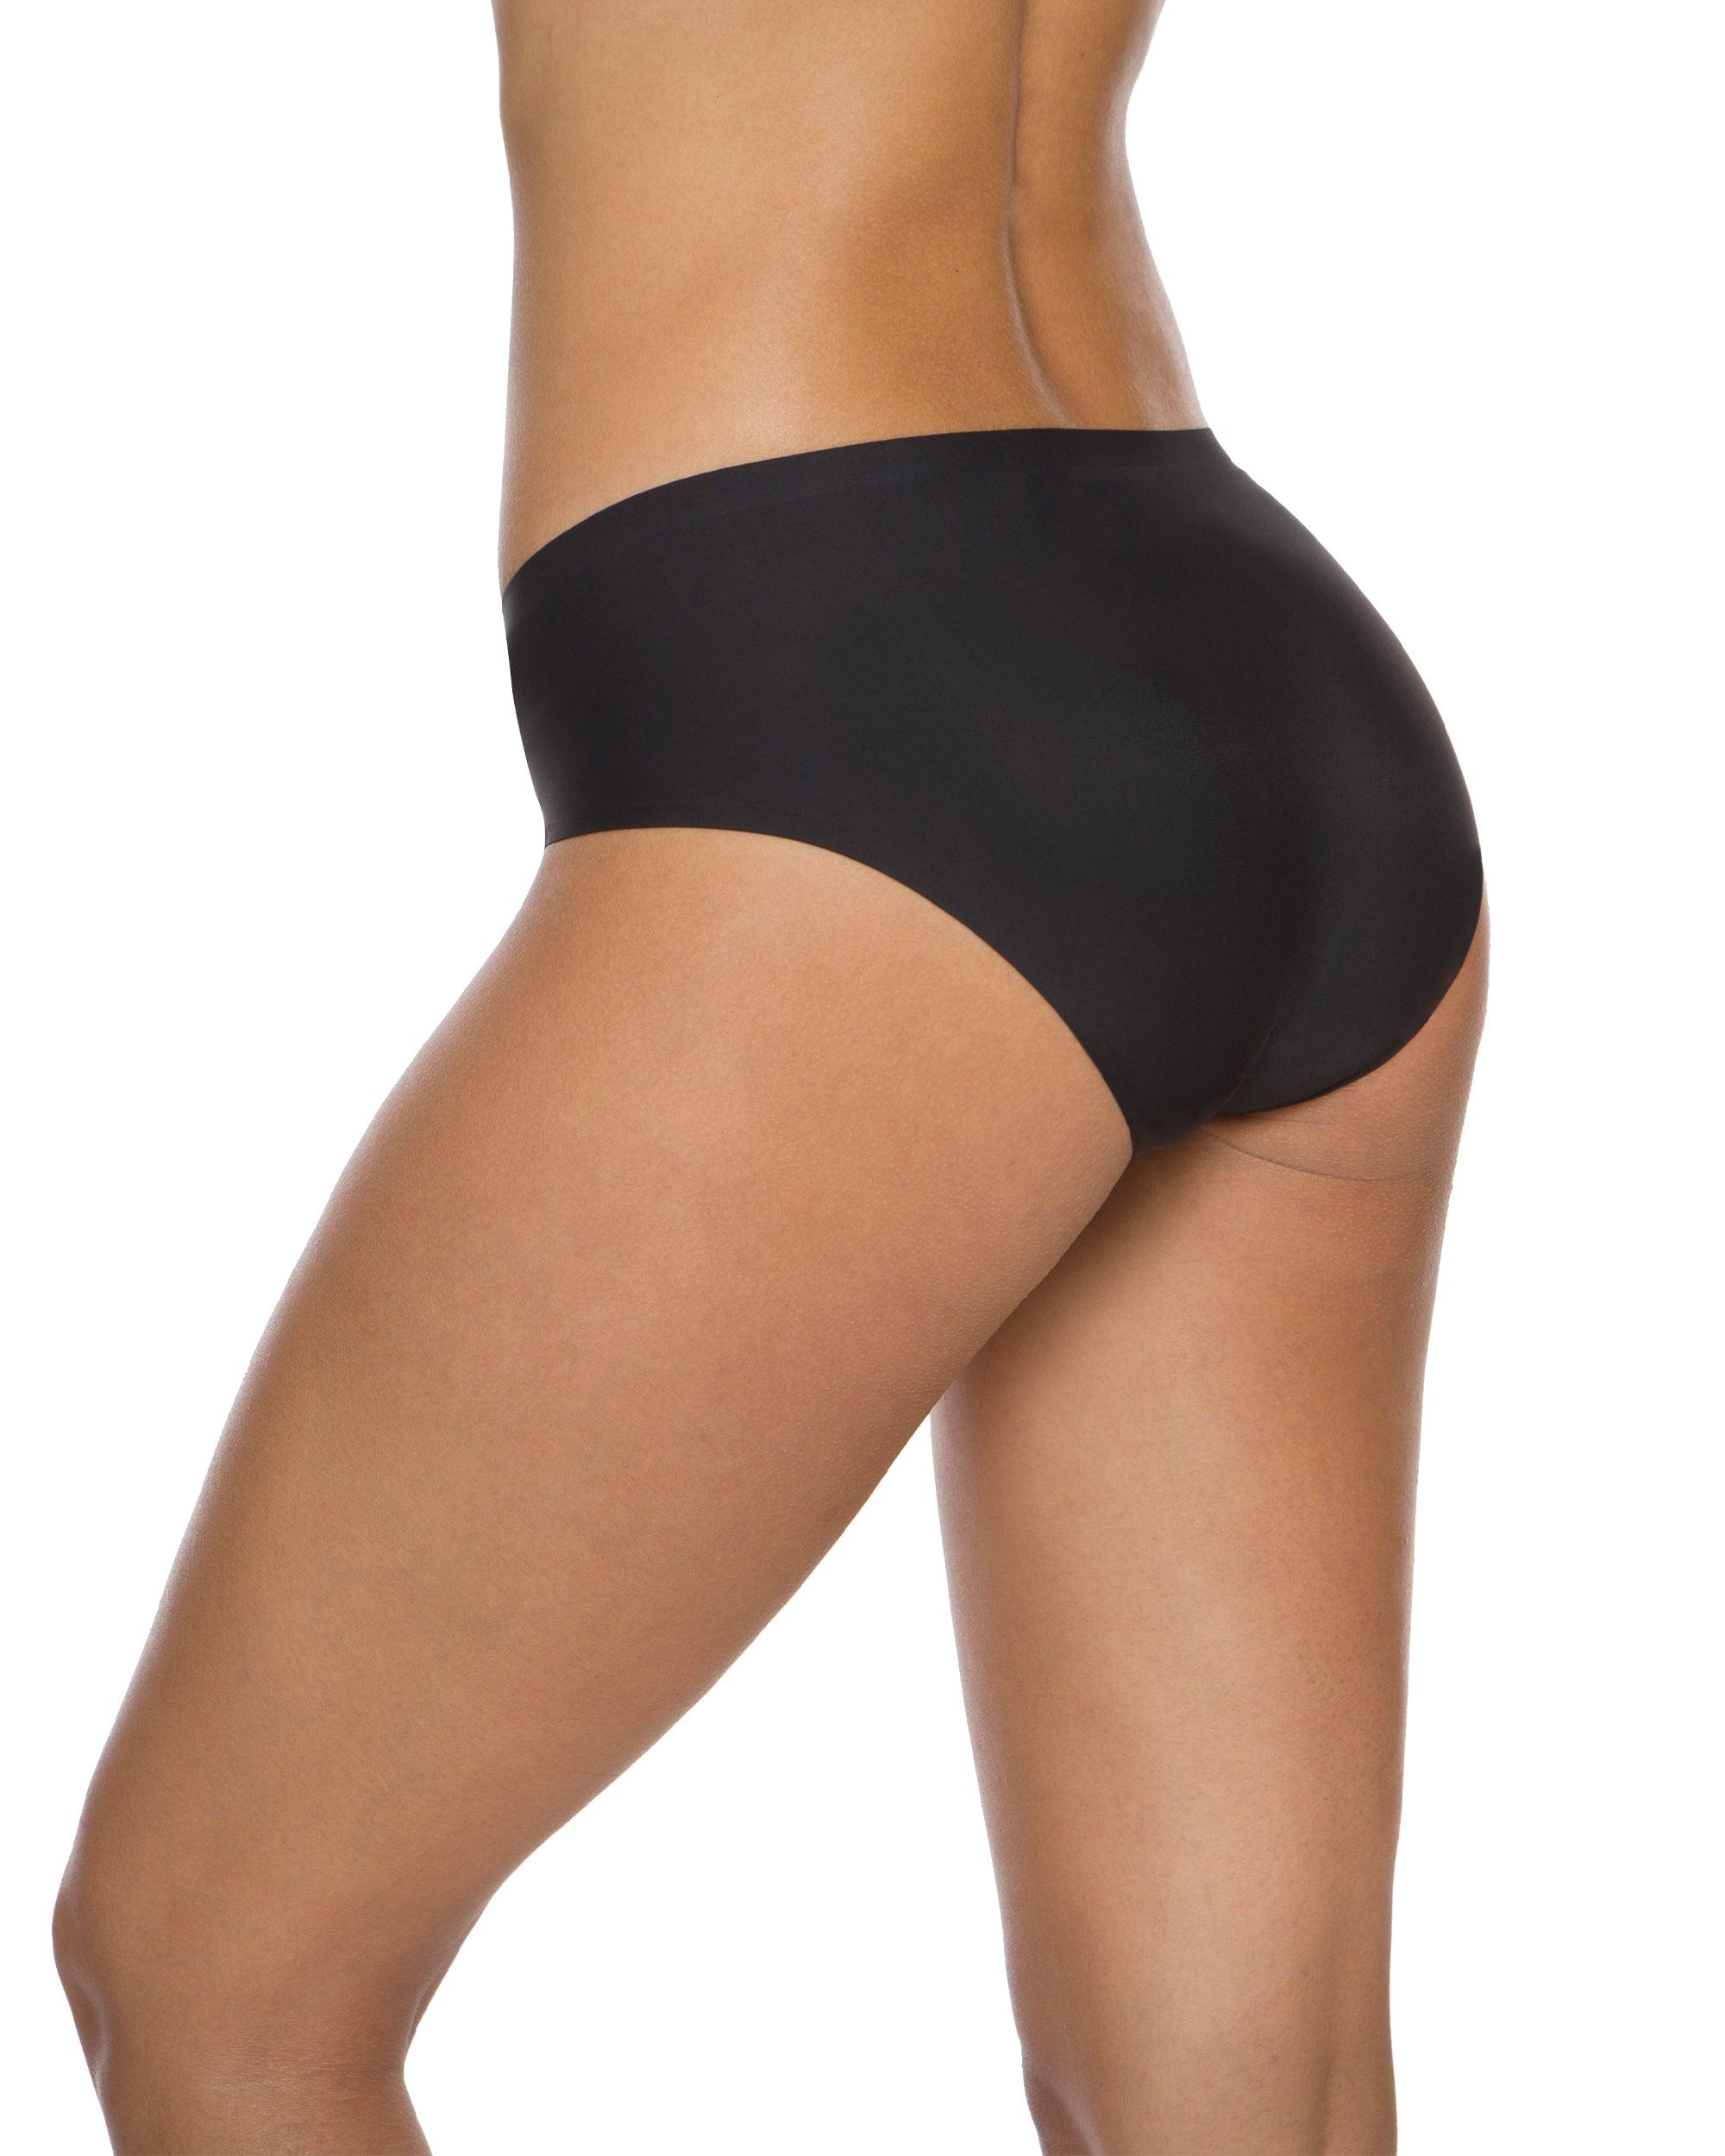 ALTHEANRAY Women s Seamless Hipster Underwear No Show Panties Soft